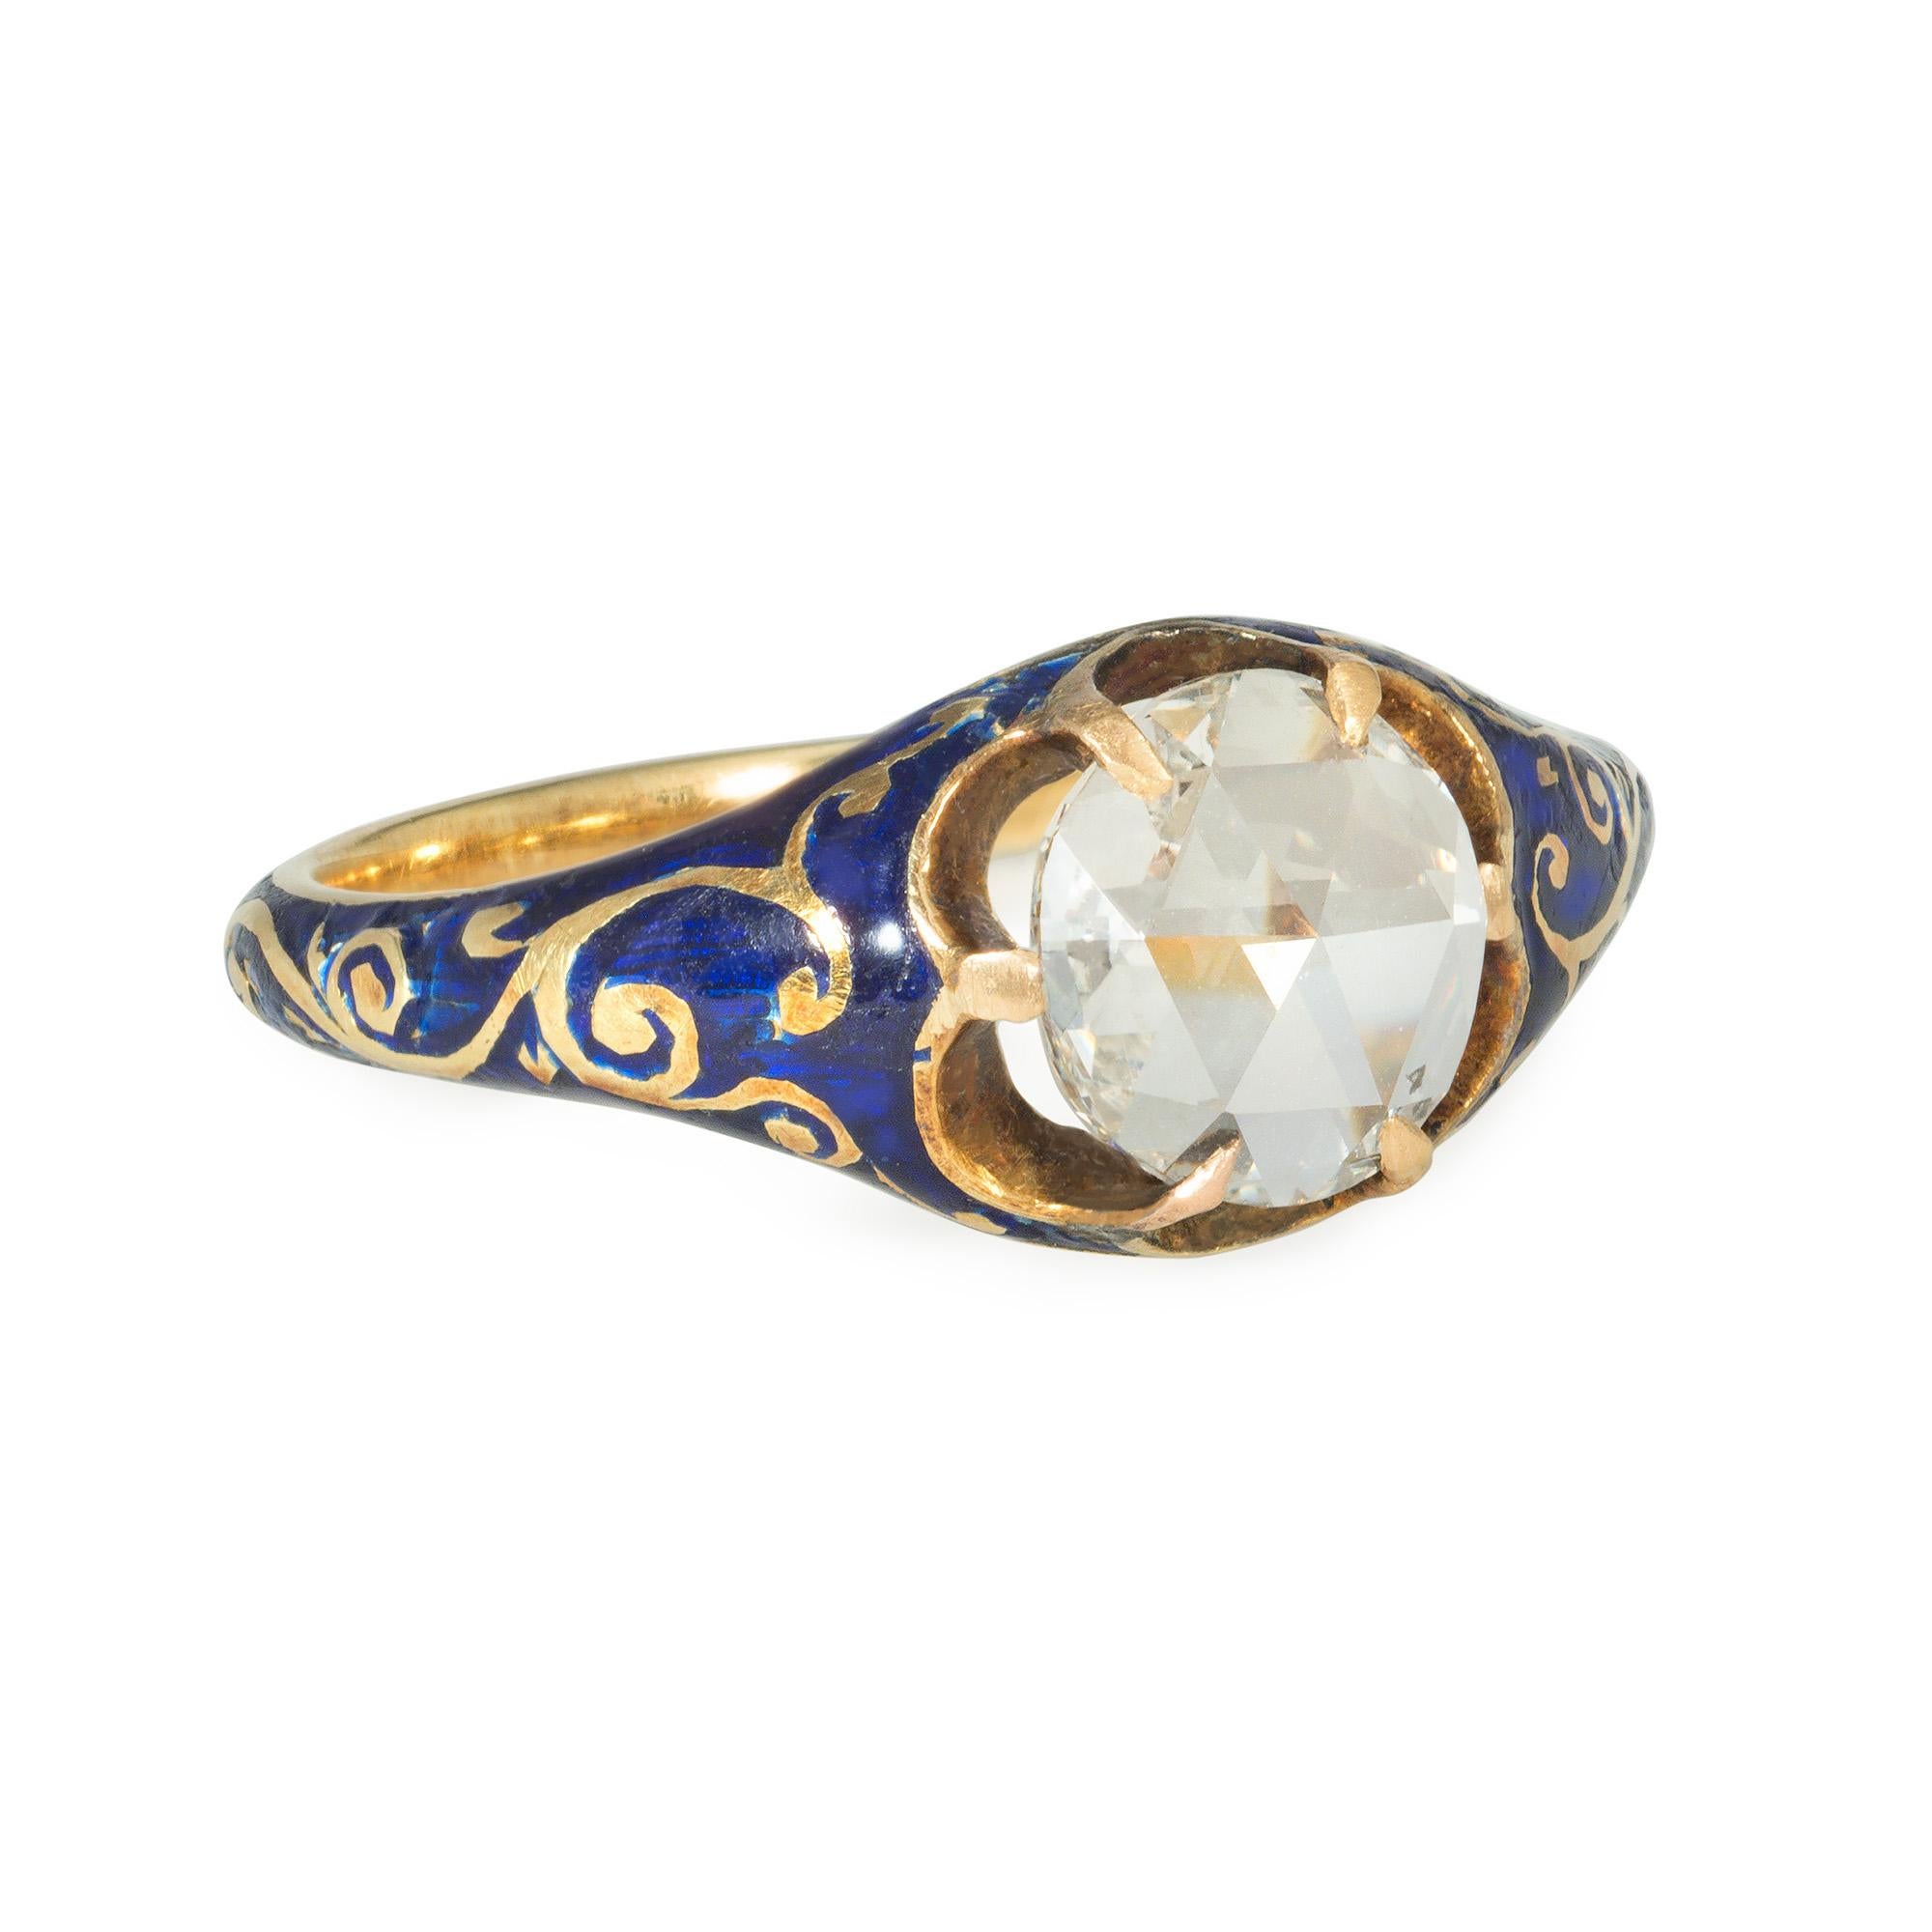 An antique early Victorian gold, diamond, and enamel ring featuring a rose-cut diamond center in a tapering gold mount decorated with a blue enamel foliate pattern, in 15k gold.  England.  Atw diamond 0.47 ct.

Ring may be made smaller by adding a